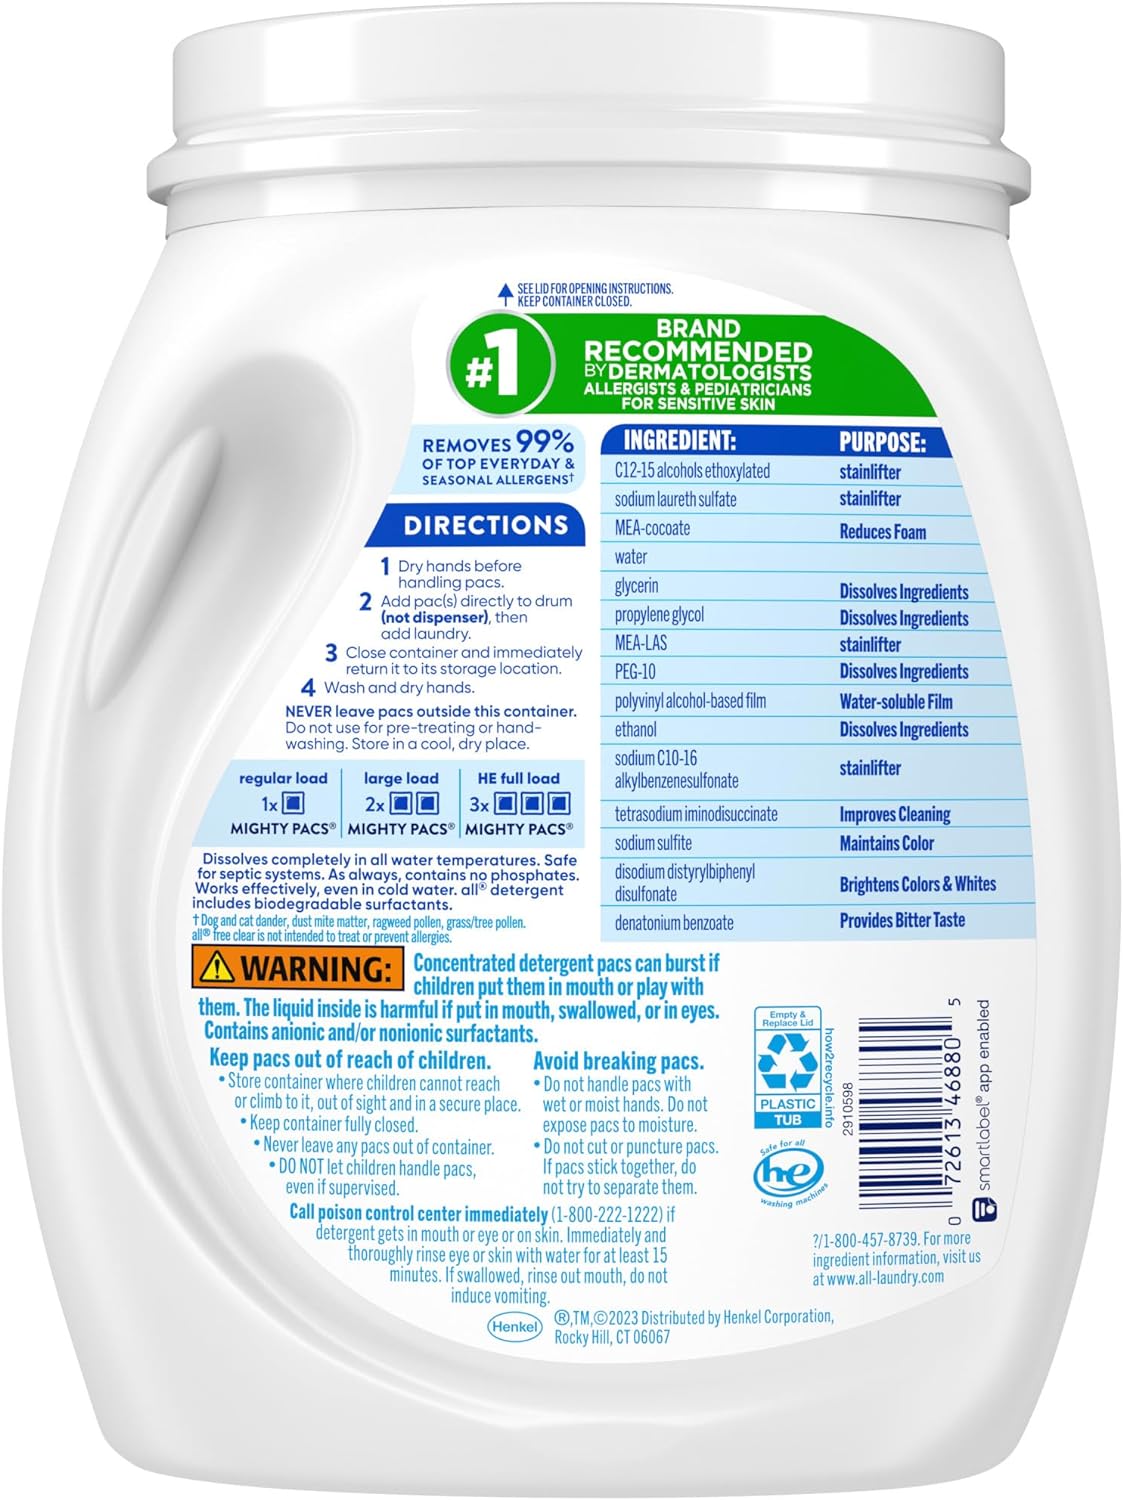 All Mighty Pacs Laundry Detergent, Free Clear for Sensitive Skin, Tub, 60 Count